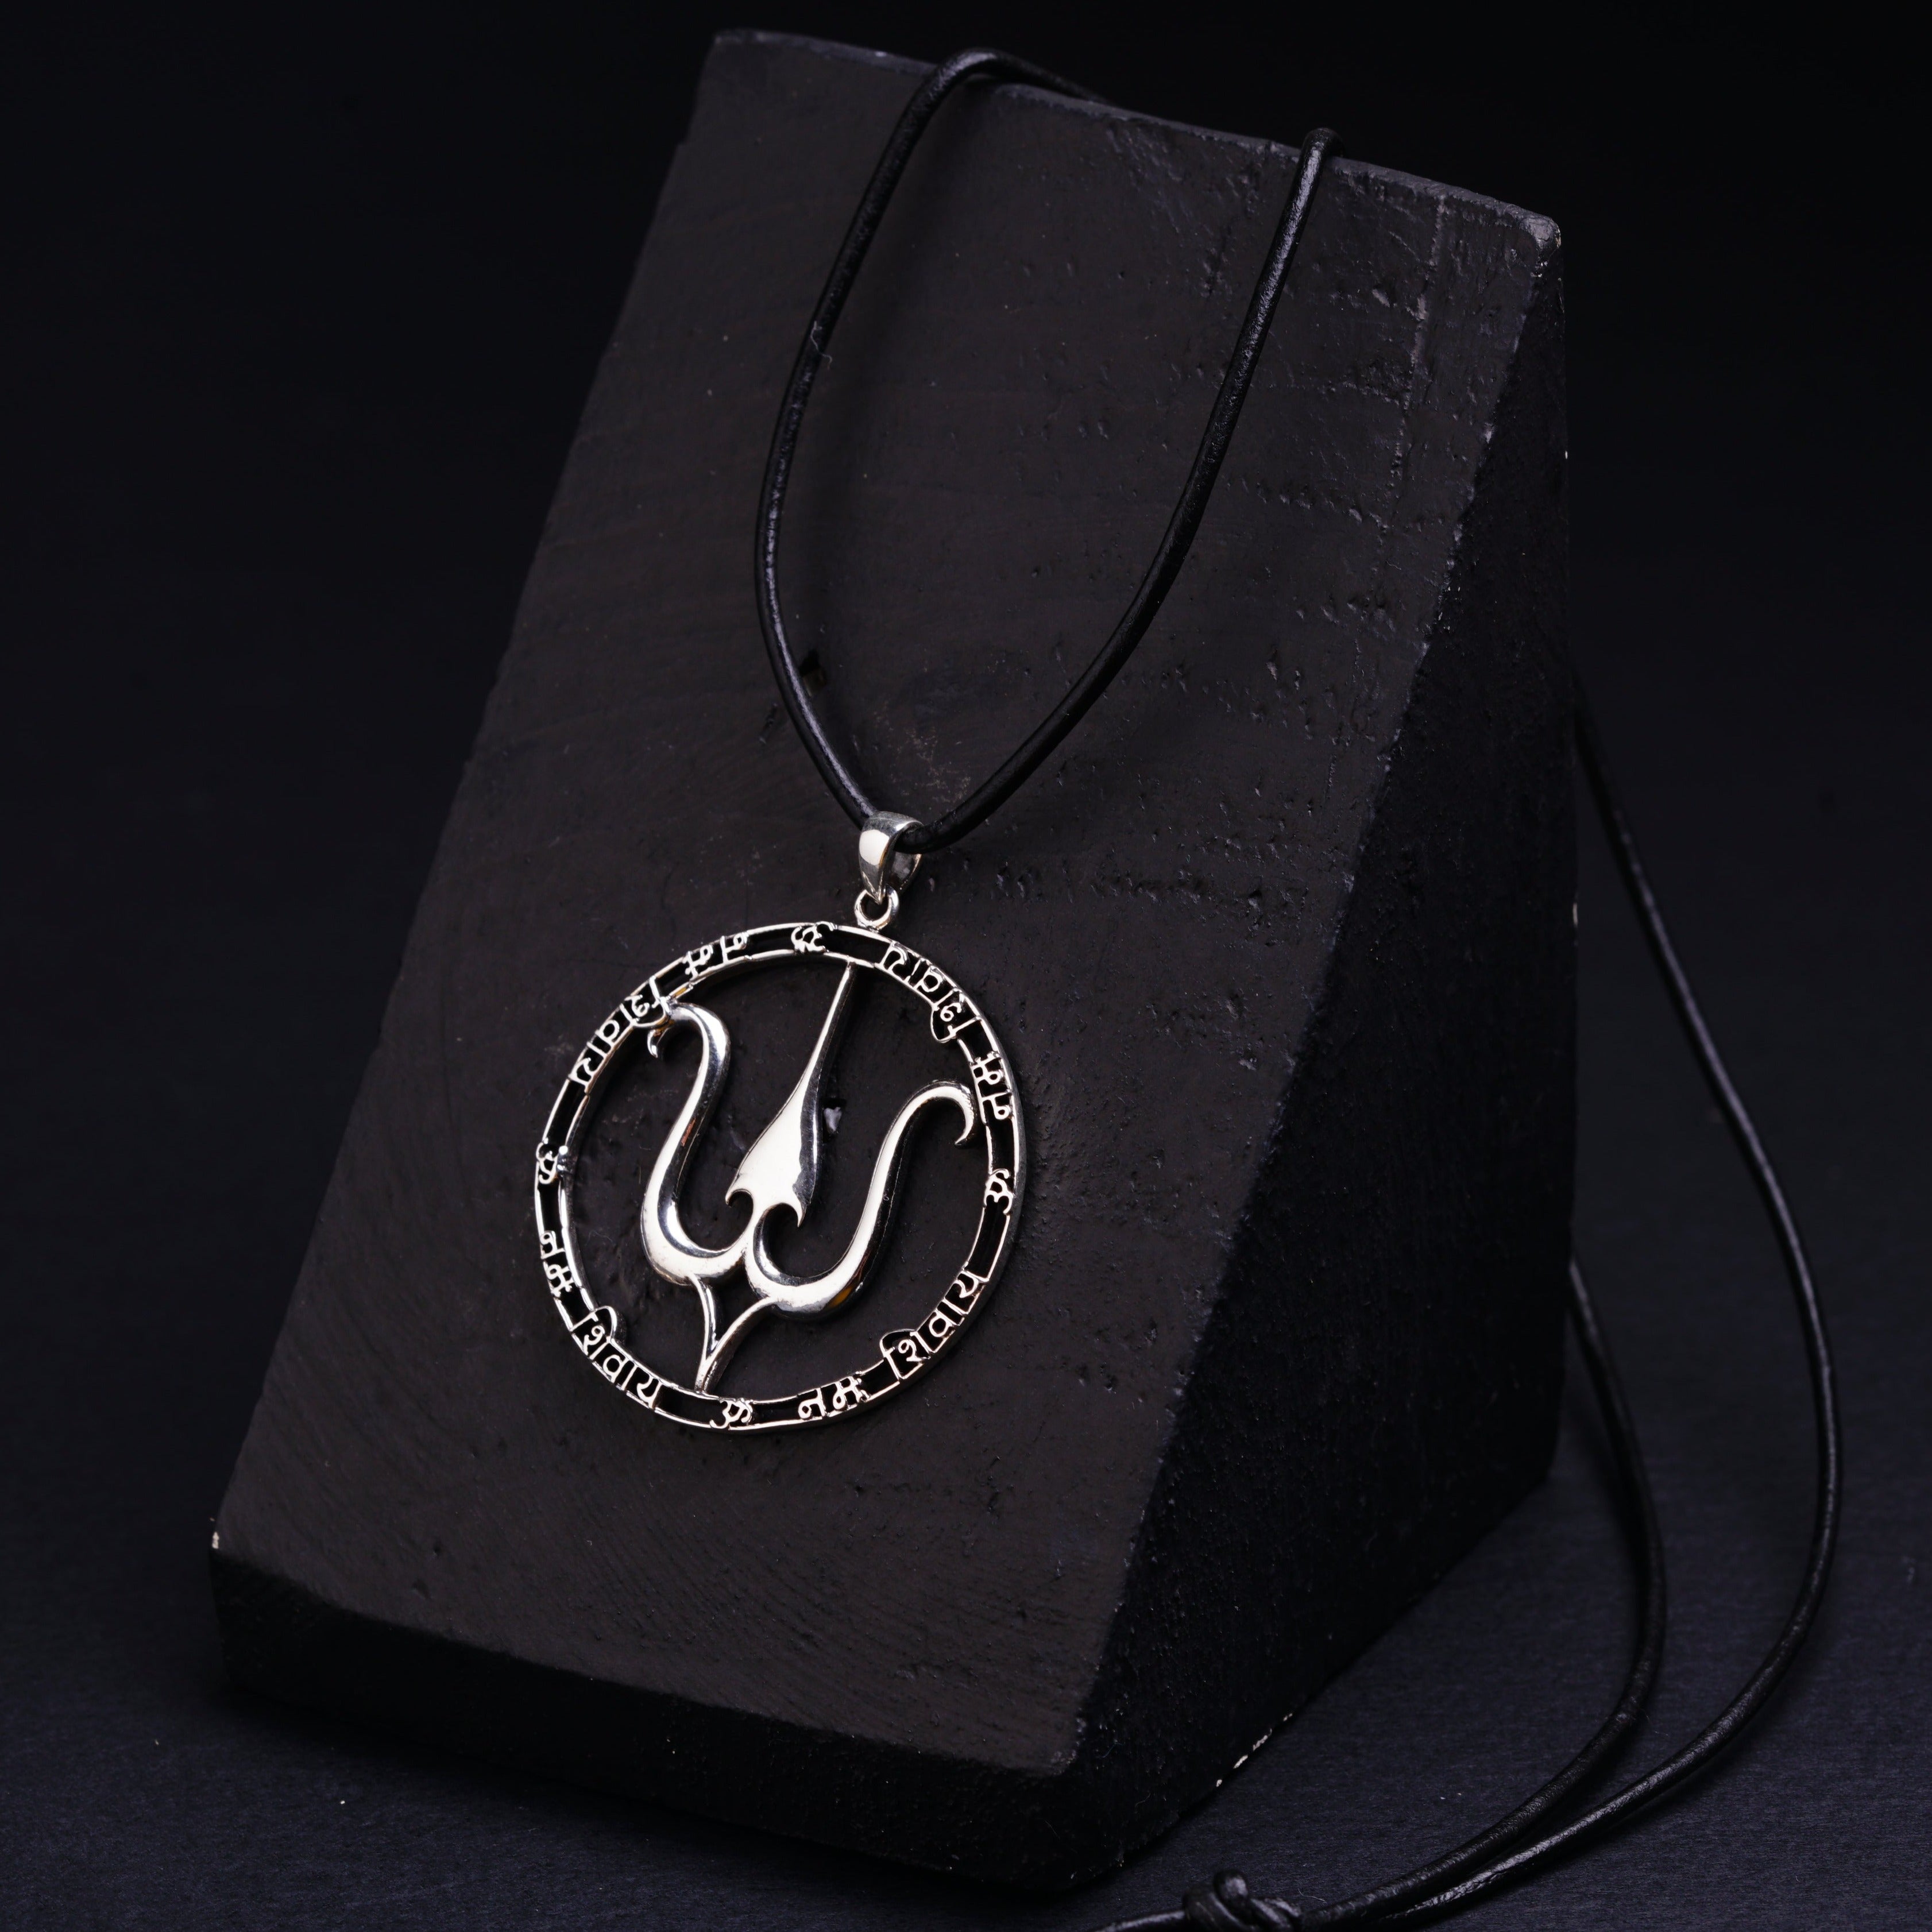 a black necklace with a silver pendant on a black box